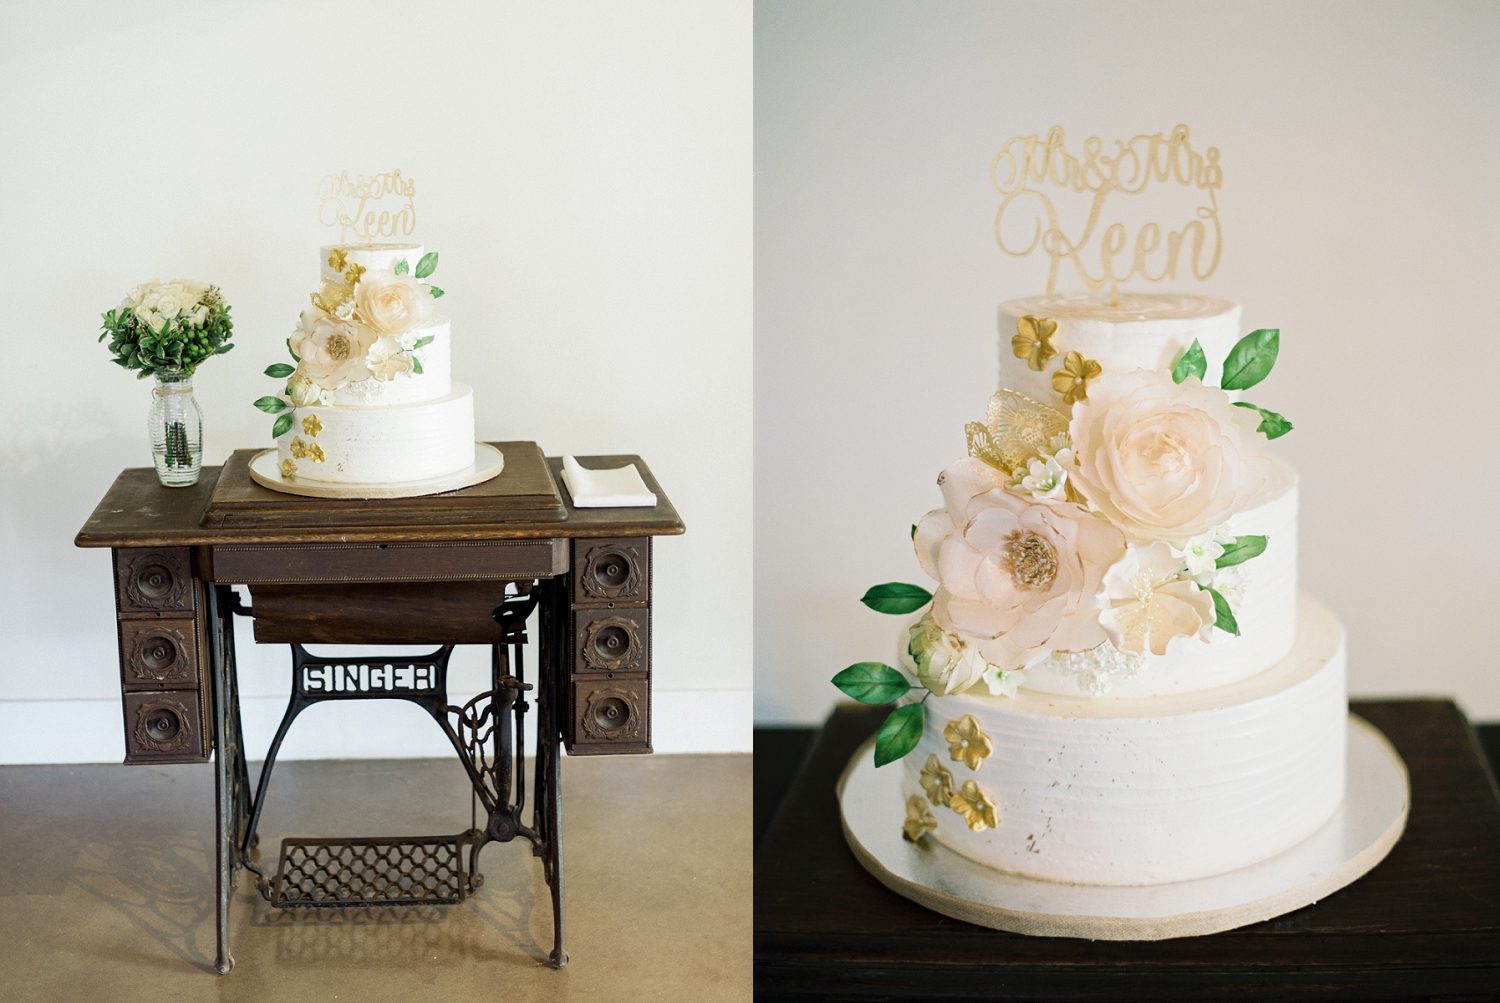 sandras cakes, blush and gold wedding cake, calligraphy cake topper, vintage cake stand ideas, floral wedding cake